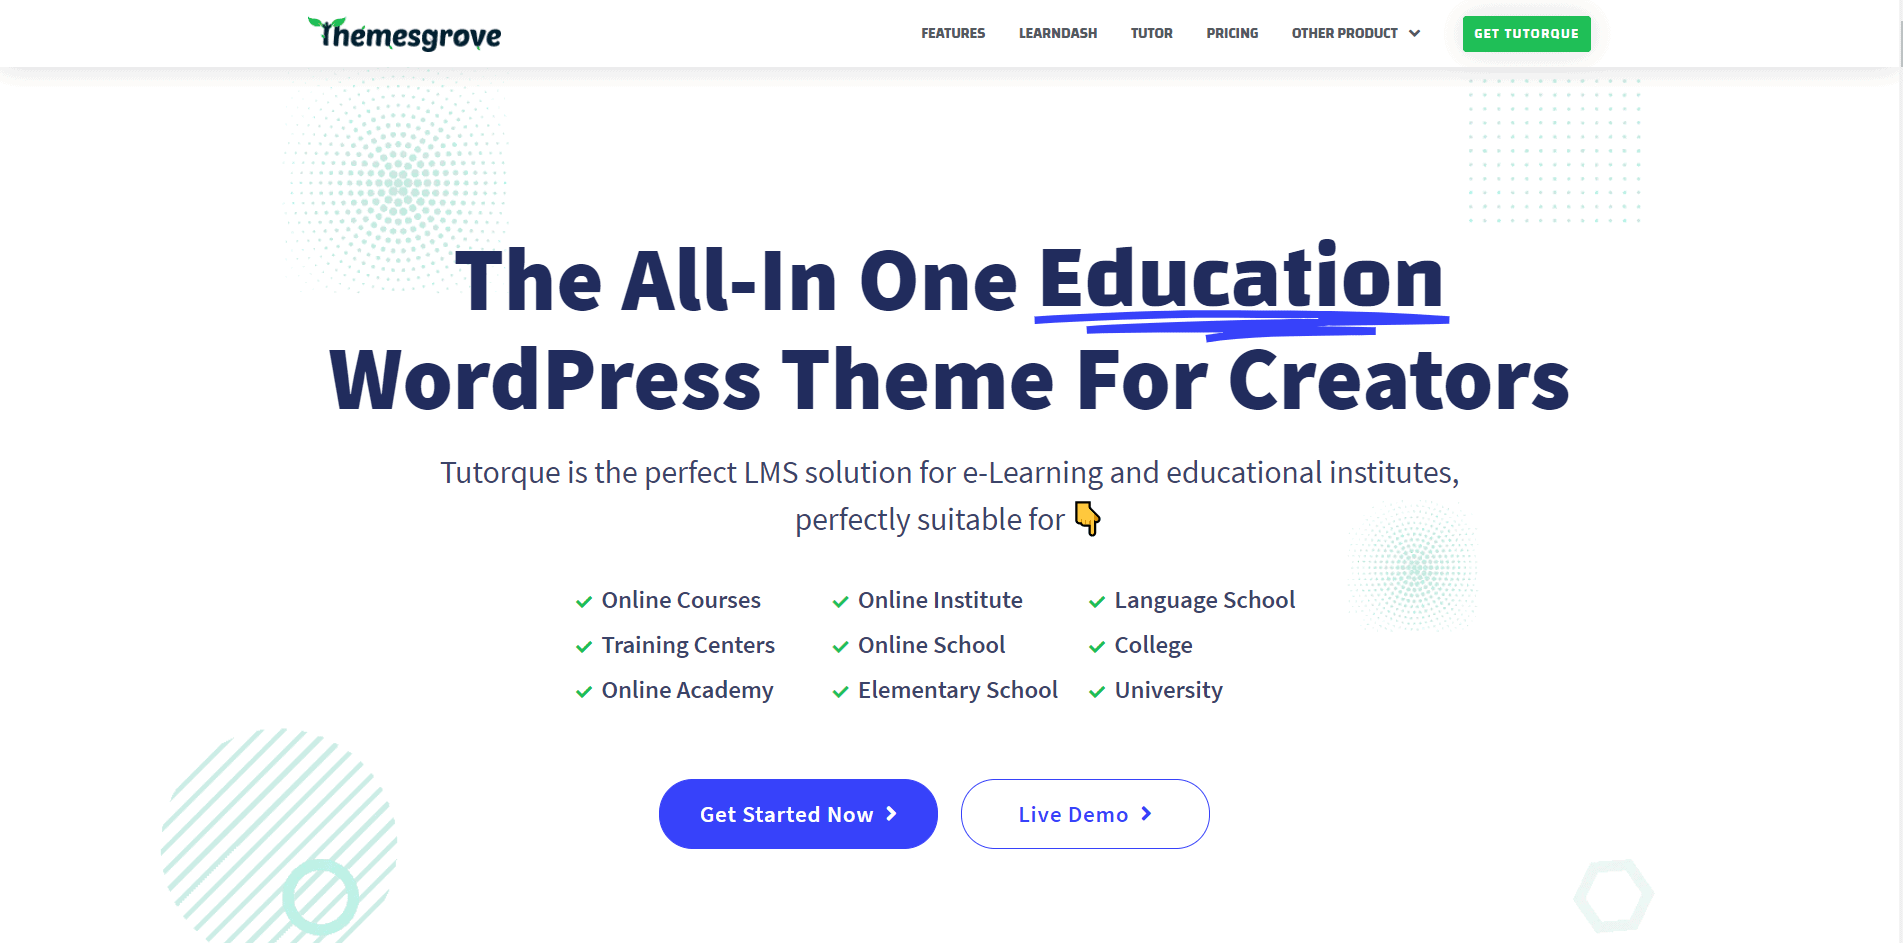 Introducing Tutorque The All-In-One LMS WordPress Theme for Creators 1